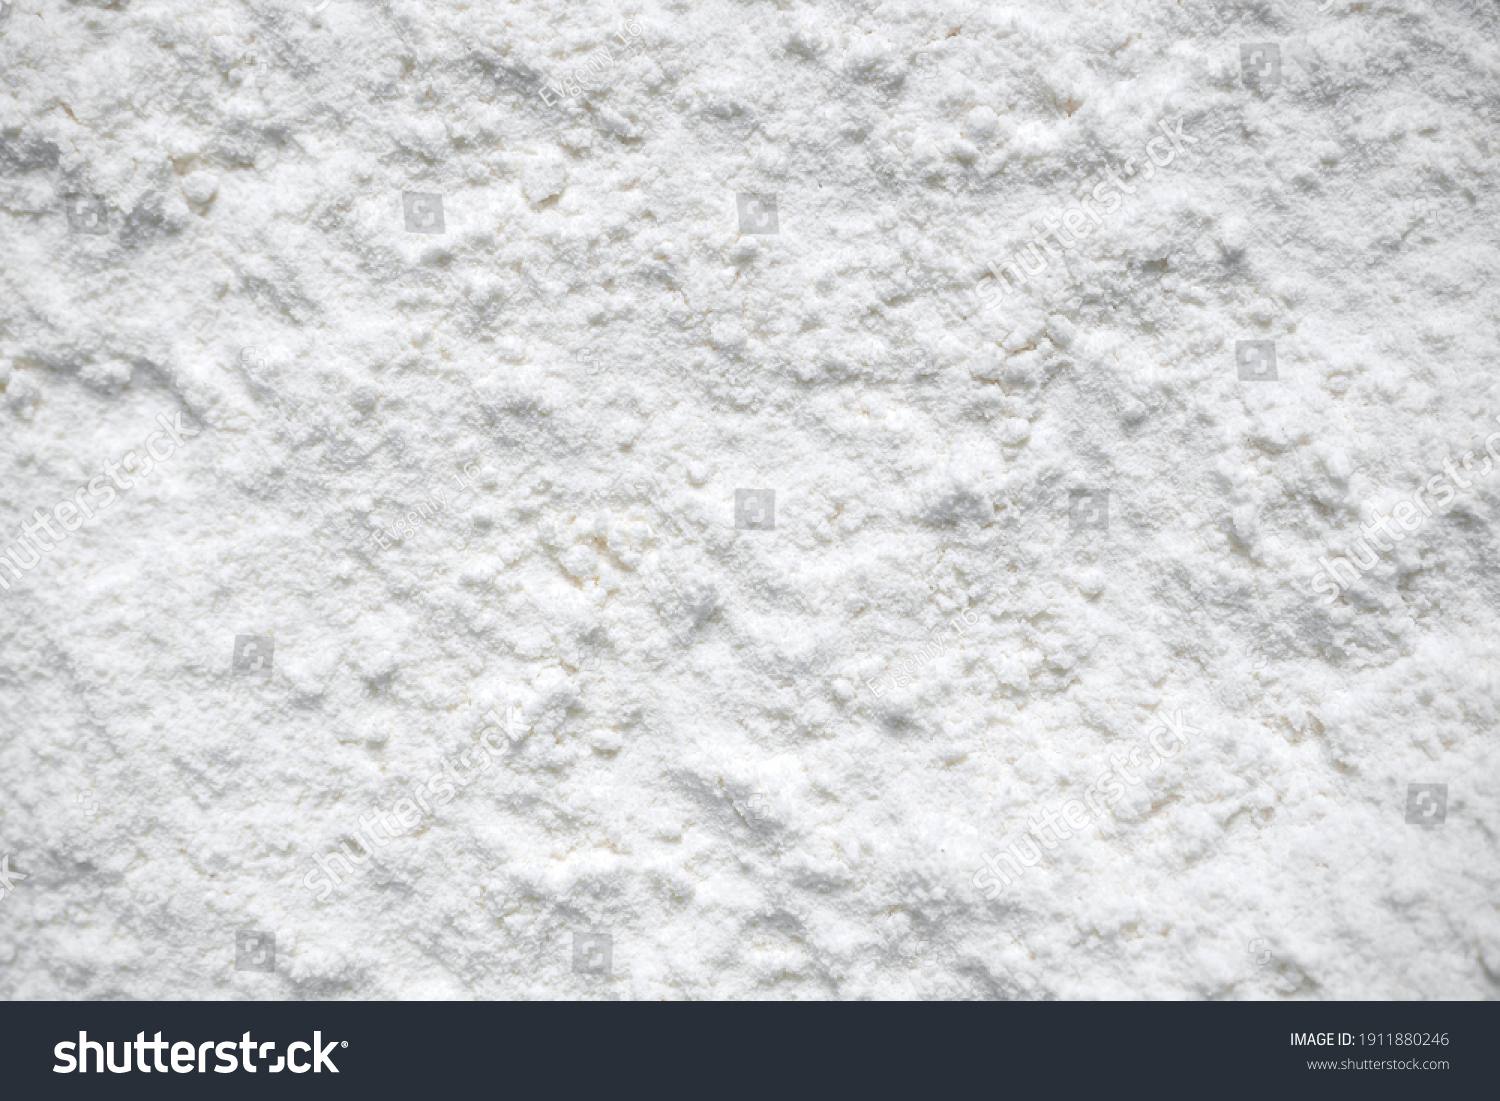 Abstract white background. Powder surface texture. Macro. #1911880246